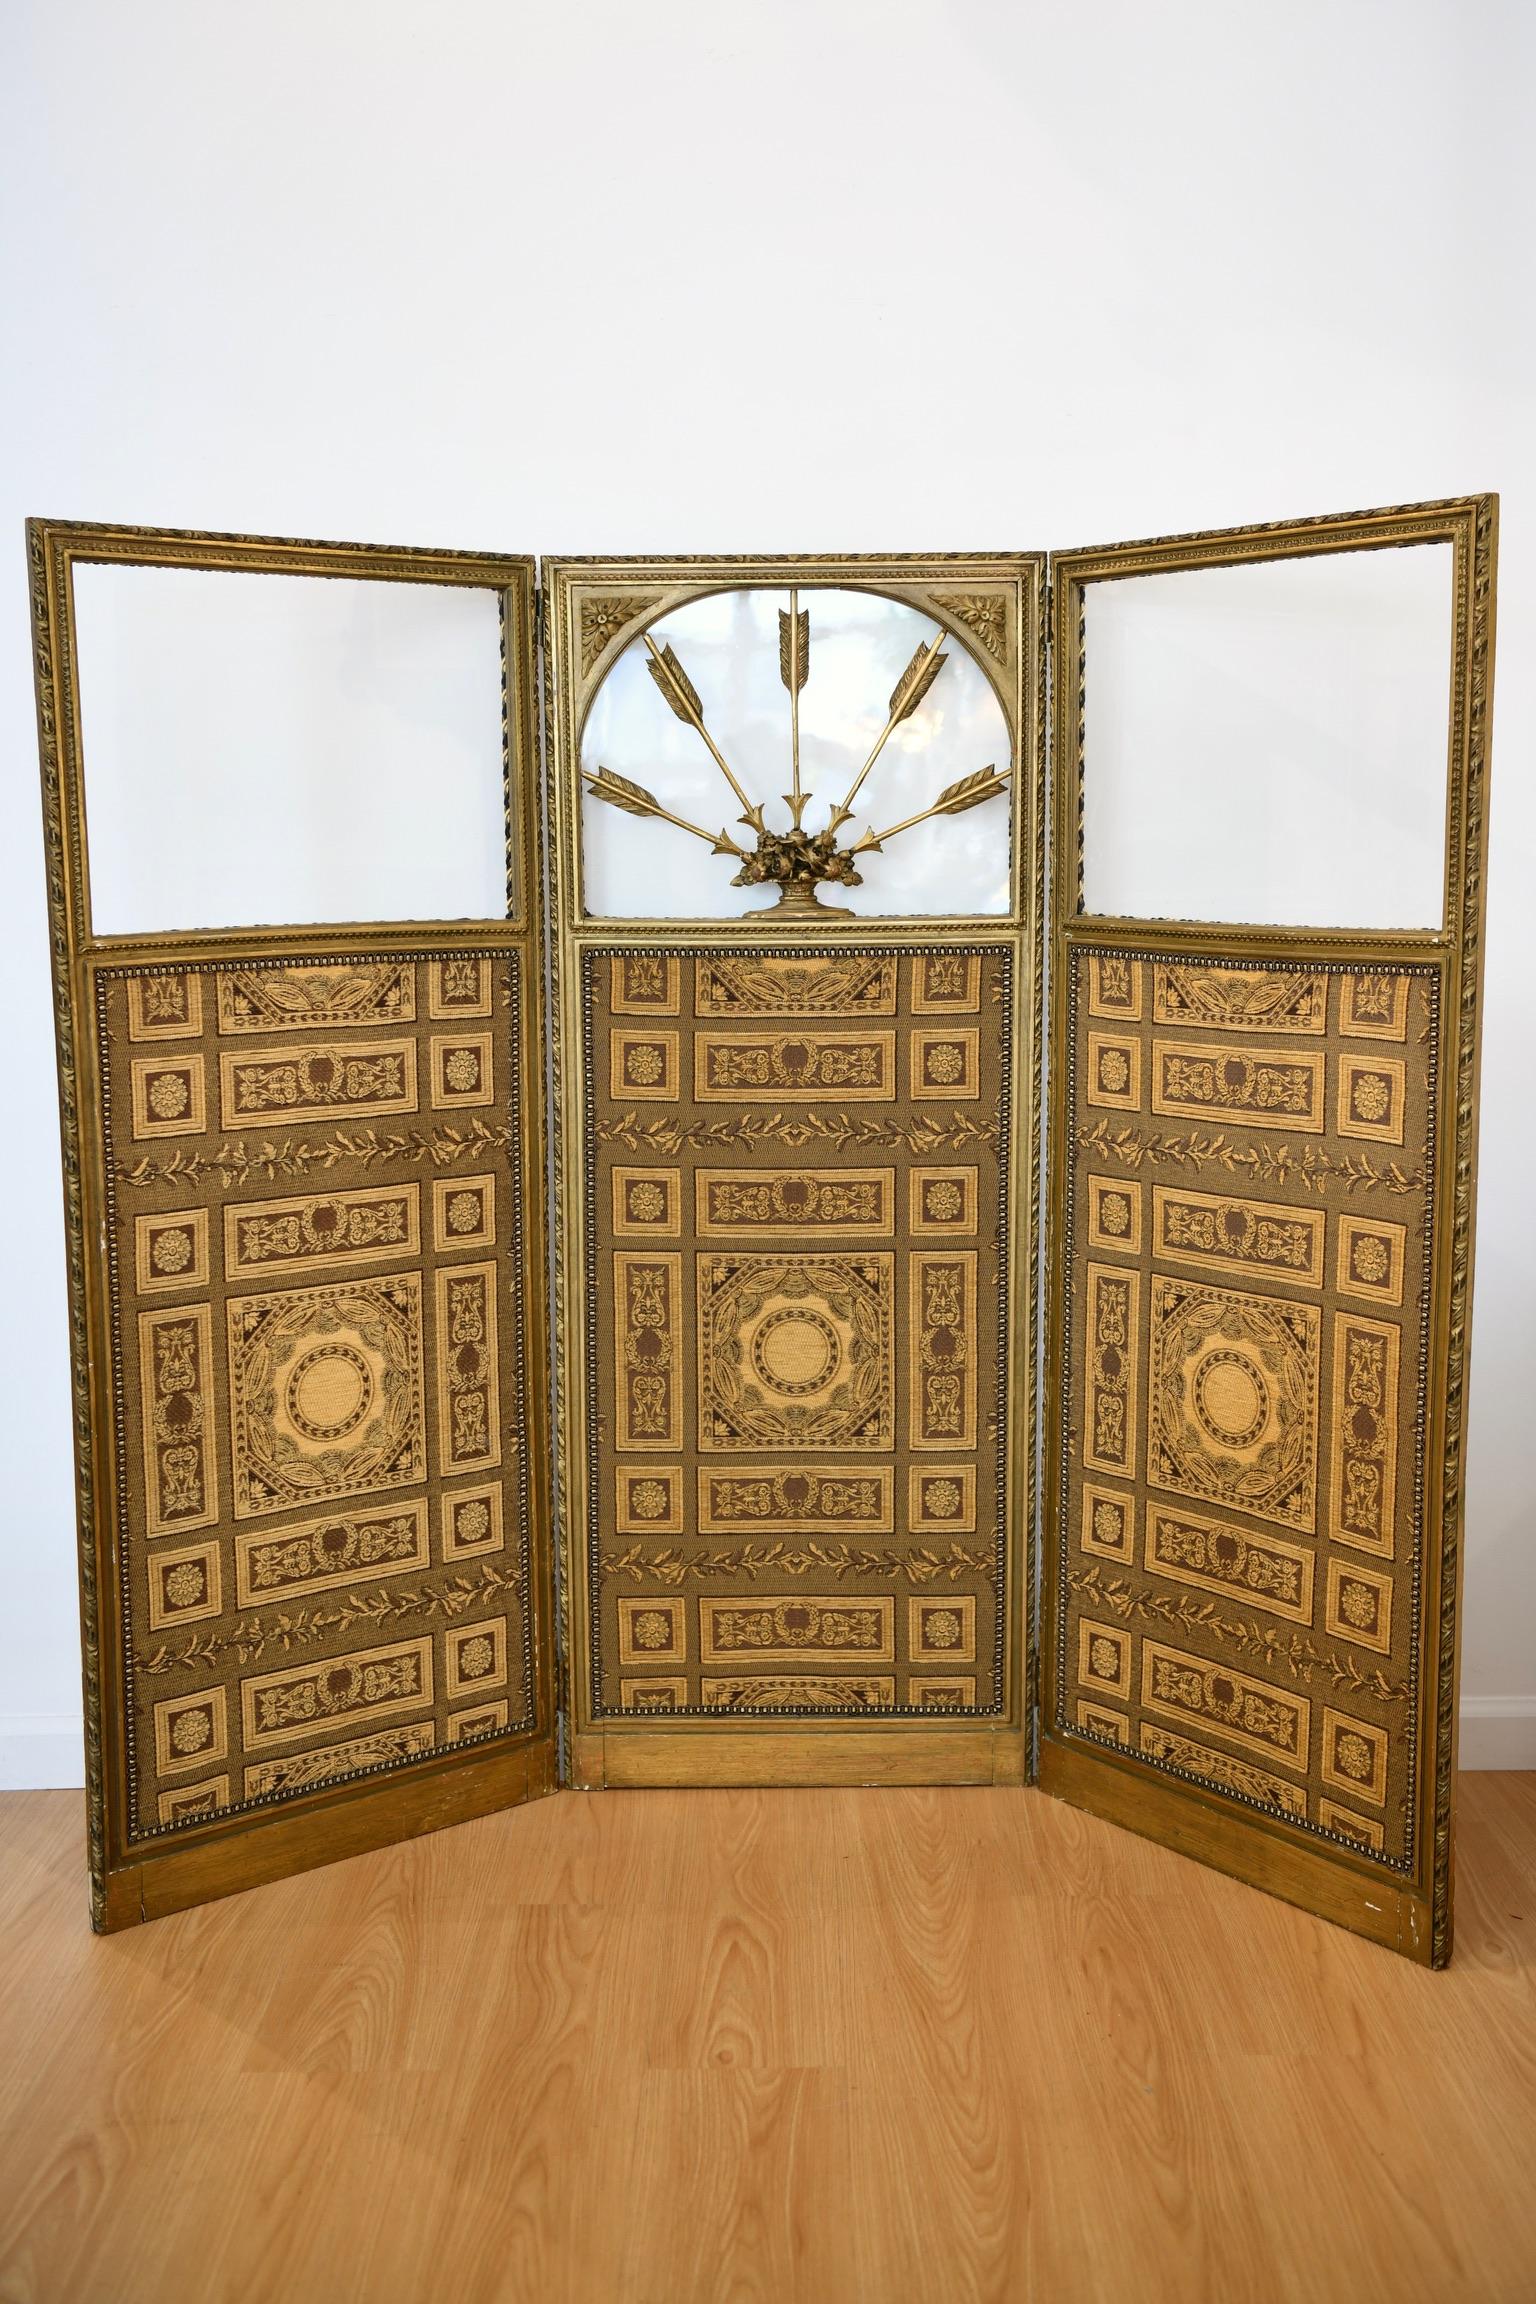 French Directoire folding screen with glass top and fabric panels. Dimensions: 55